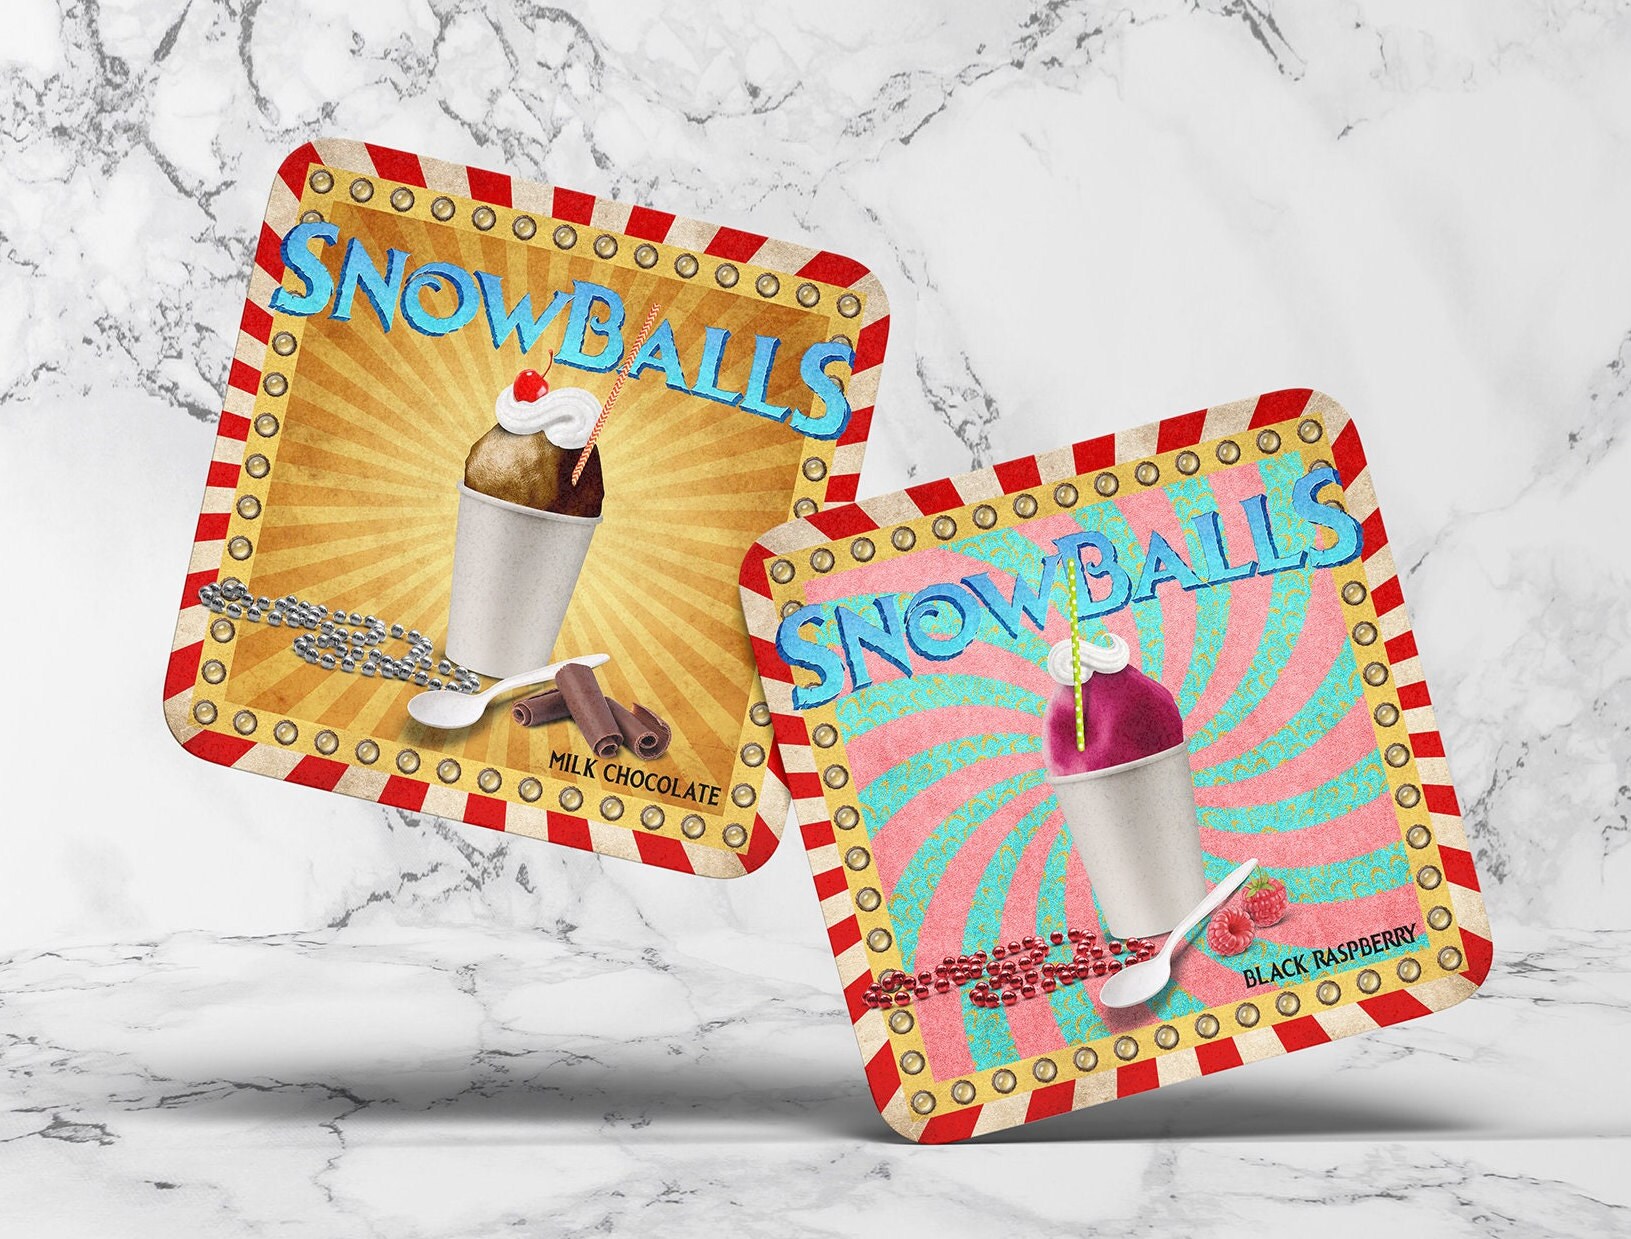 Sno-Ball Color Kit, Sno-ball, Snowcone, Rainbow color kit, New Orleans Art,  Home Malone, Kids, Craft, Summer Fun, Ice treat